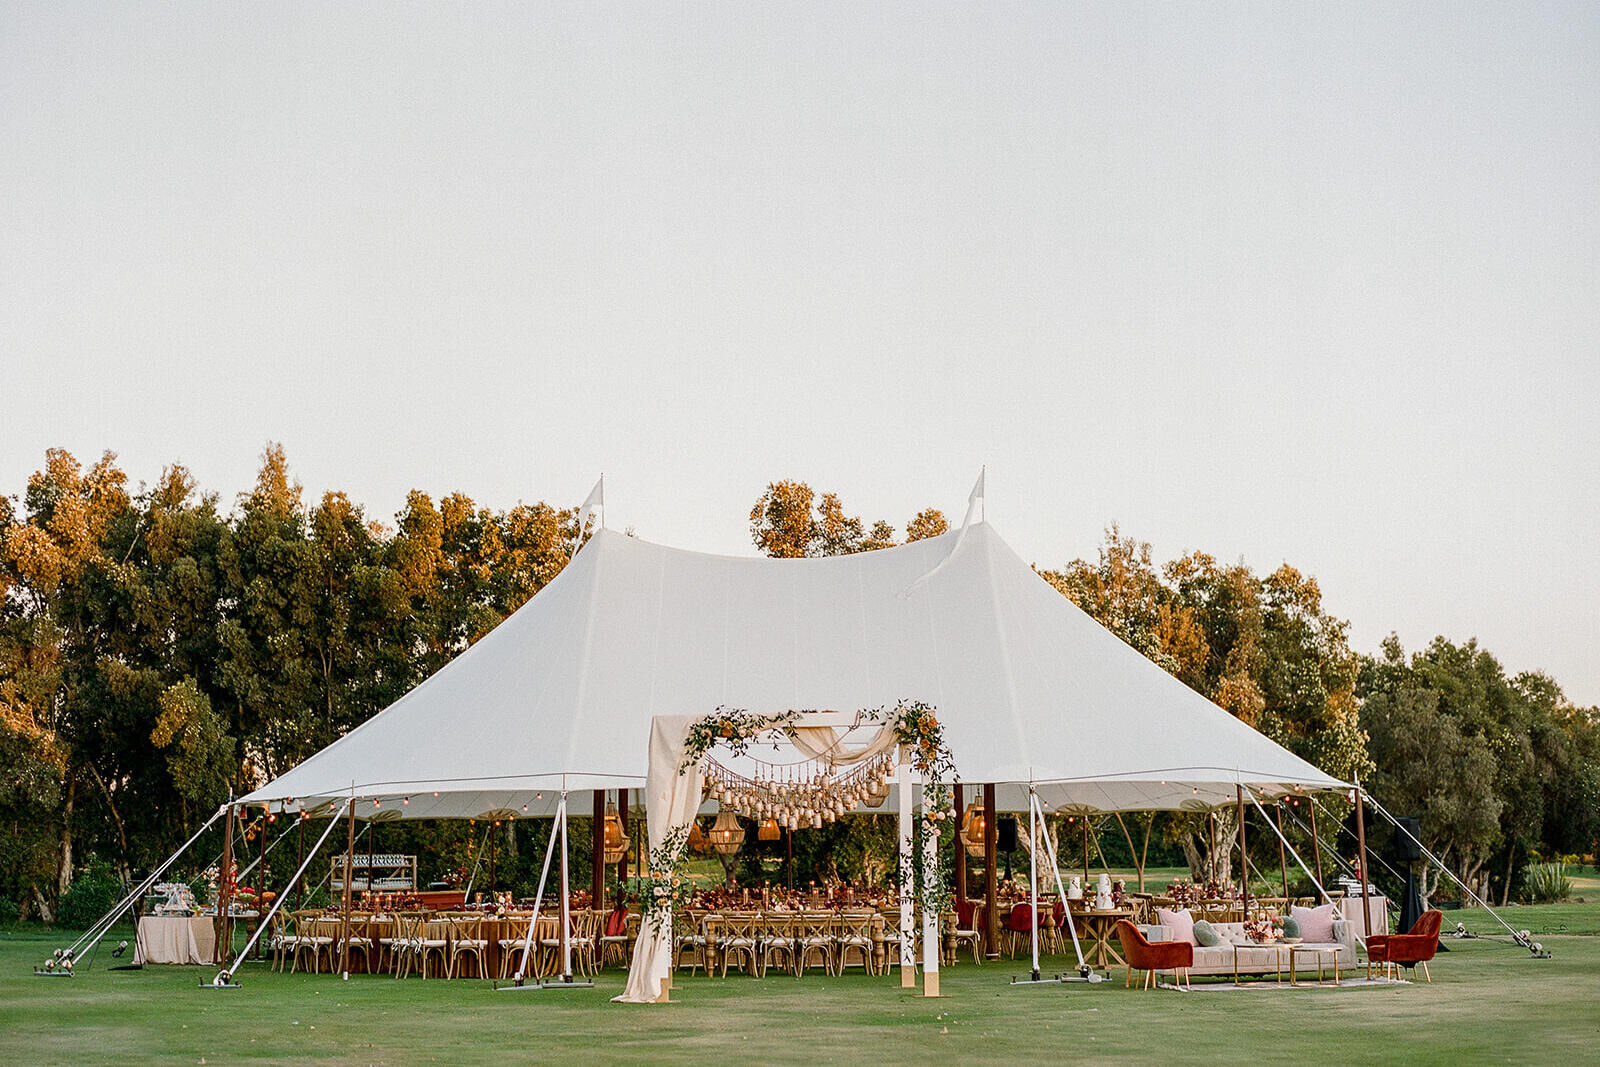 The tented reception at an earth tone wedding, complete with an outdoor seating area and archway holding brass bells that doubled as seating assignments for guests.